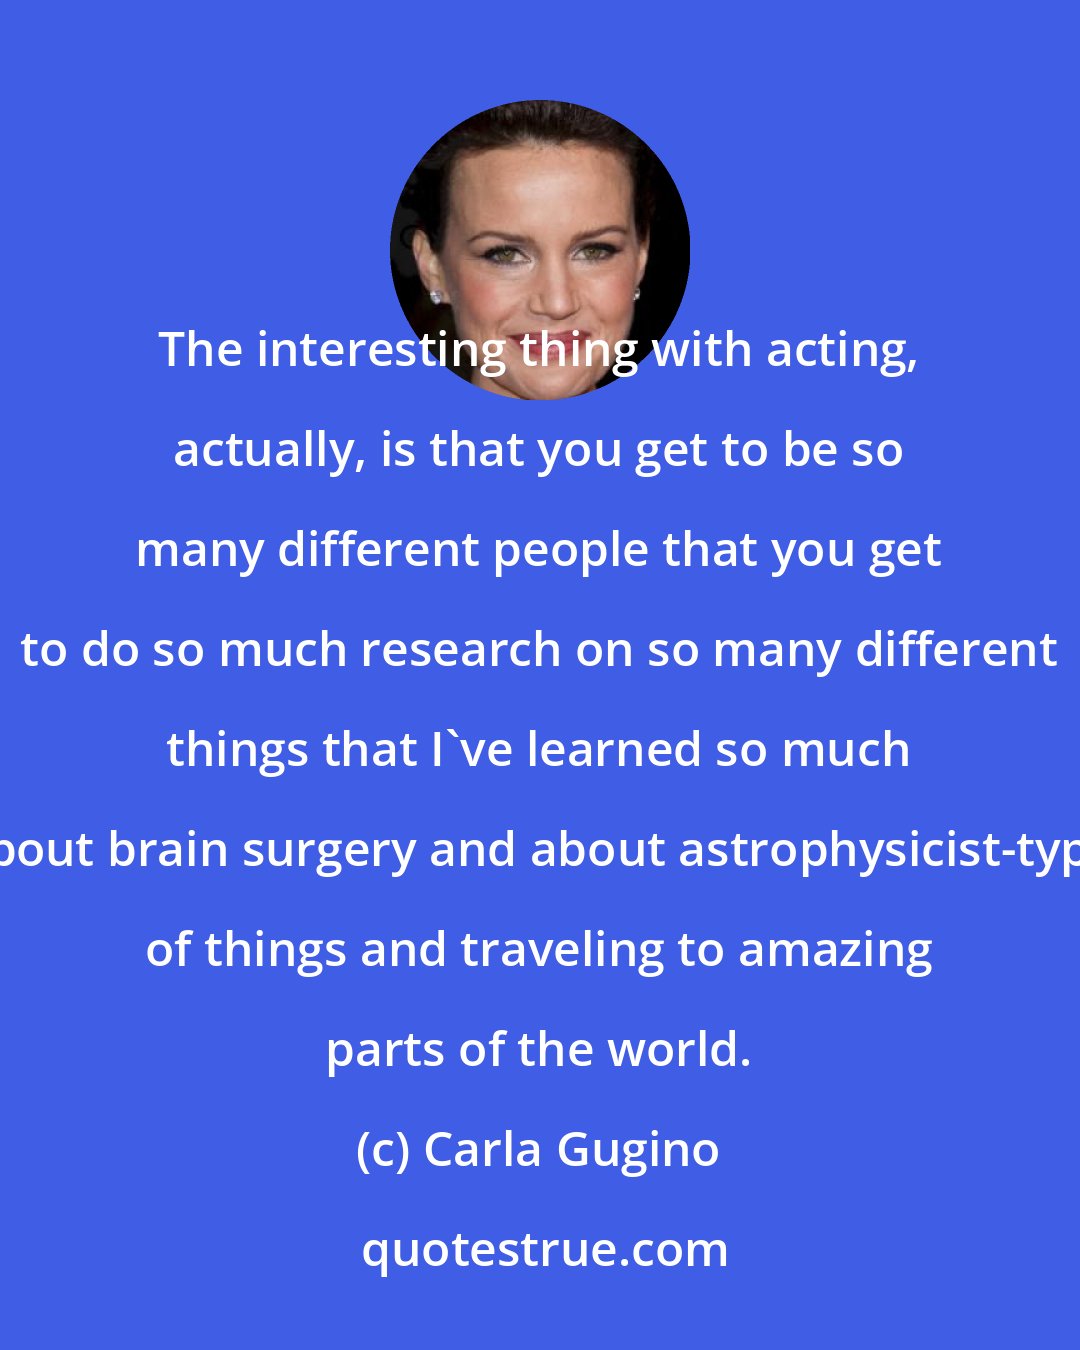 Carla Gugino: The interesting thing with acting, actually, is that you get to be so many different people that you get to do so much research on so many different things that I've learned so much about brain surgery and about astrophysicist-type of things and traveling to amazing parts of the world.